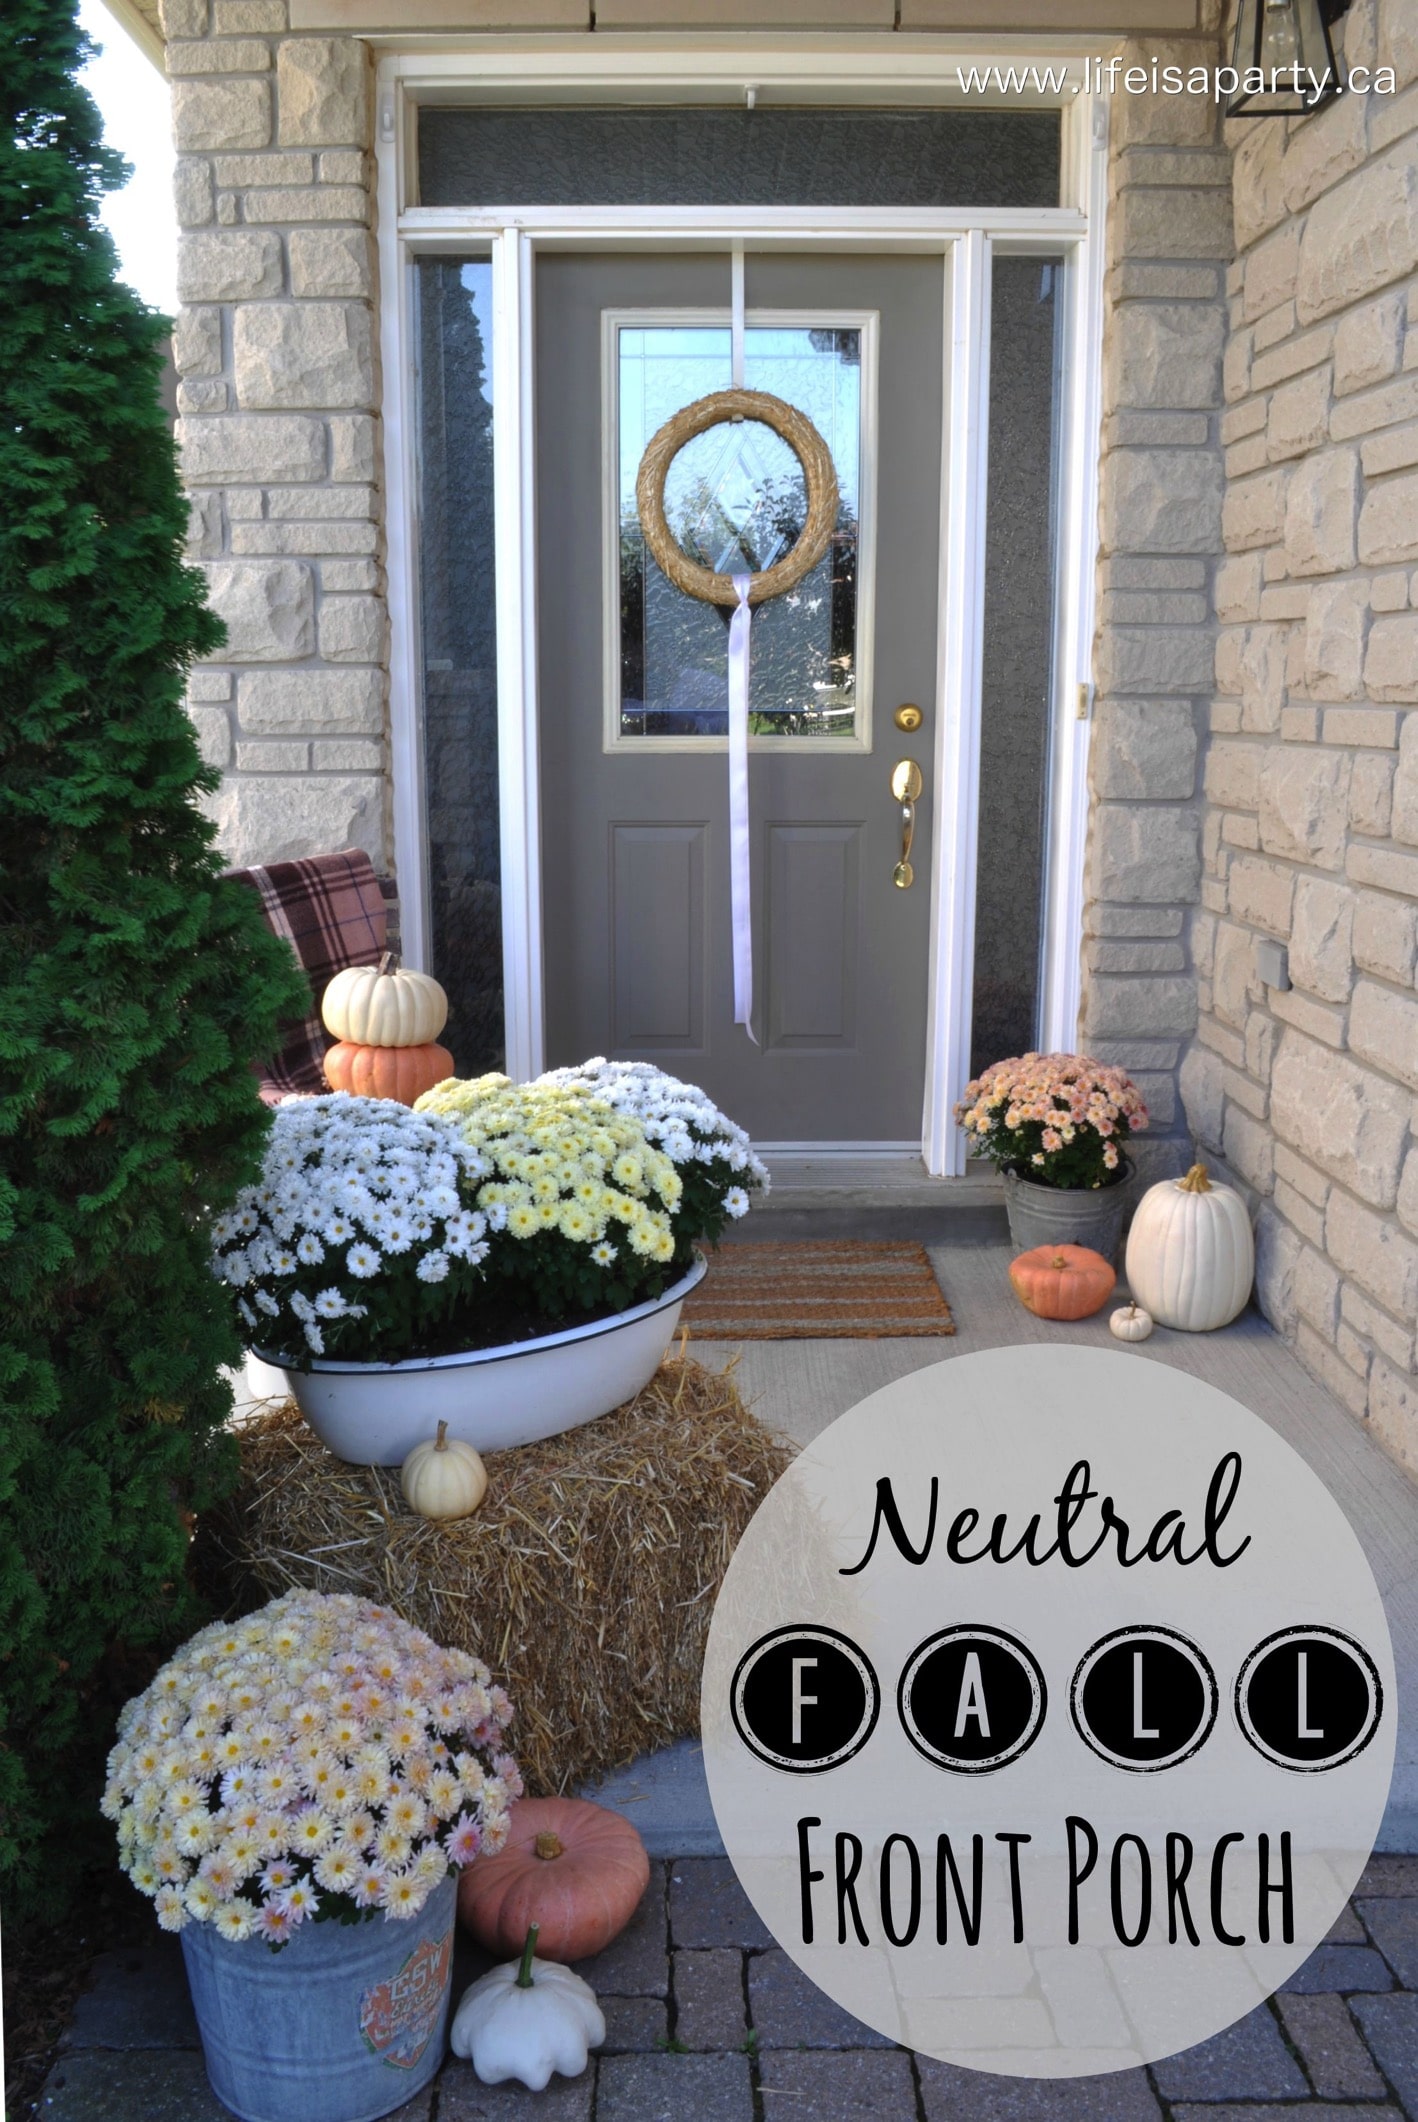 Neutral Fall Front Porch: peachy-pink and white mums, light pink pumpkins and vintage touches are part of this beautiful fall front porch decor.